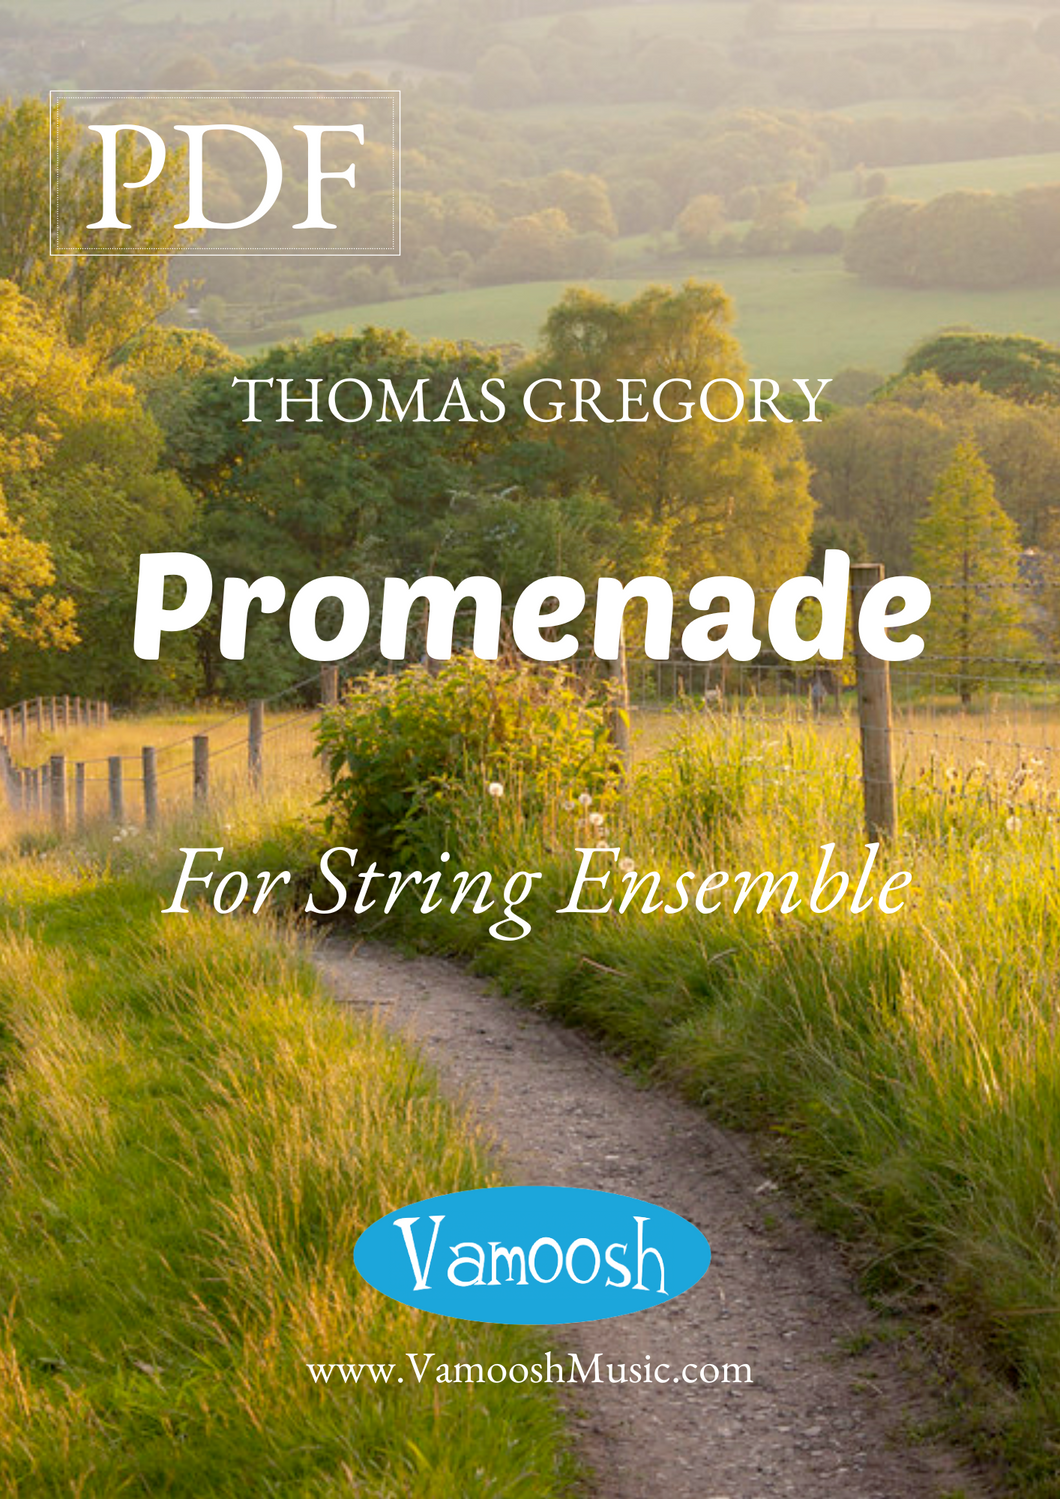 Promenade for String Ensemble by Thomas Gregory